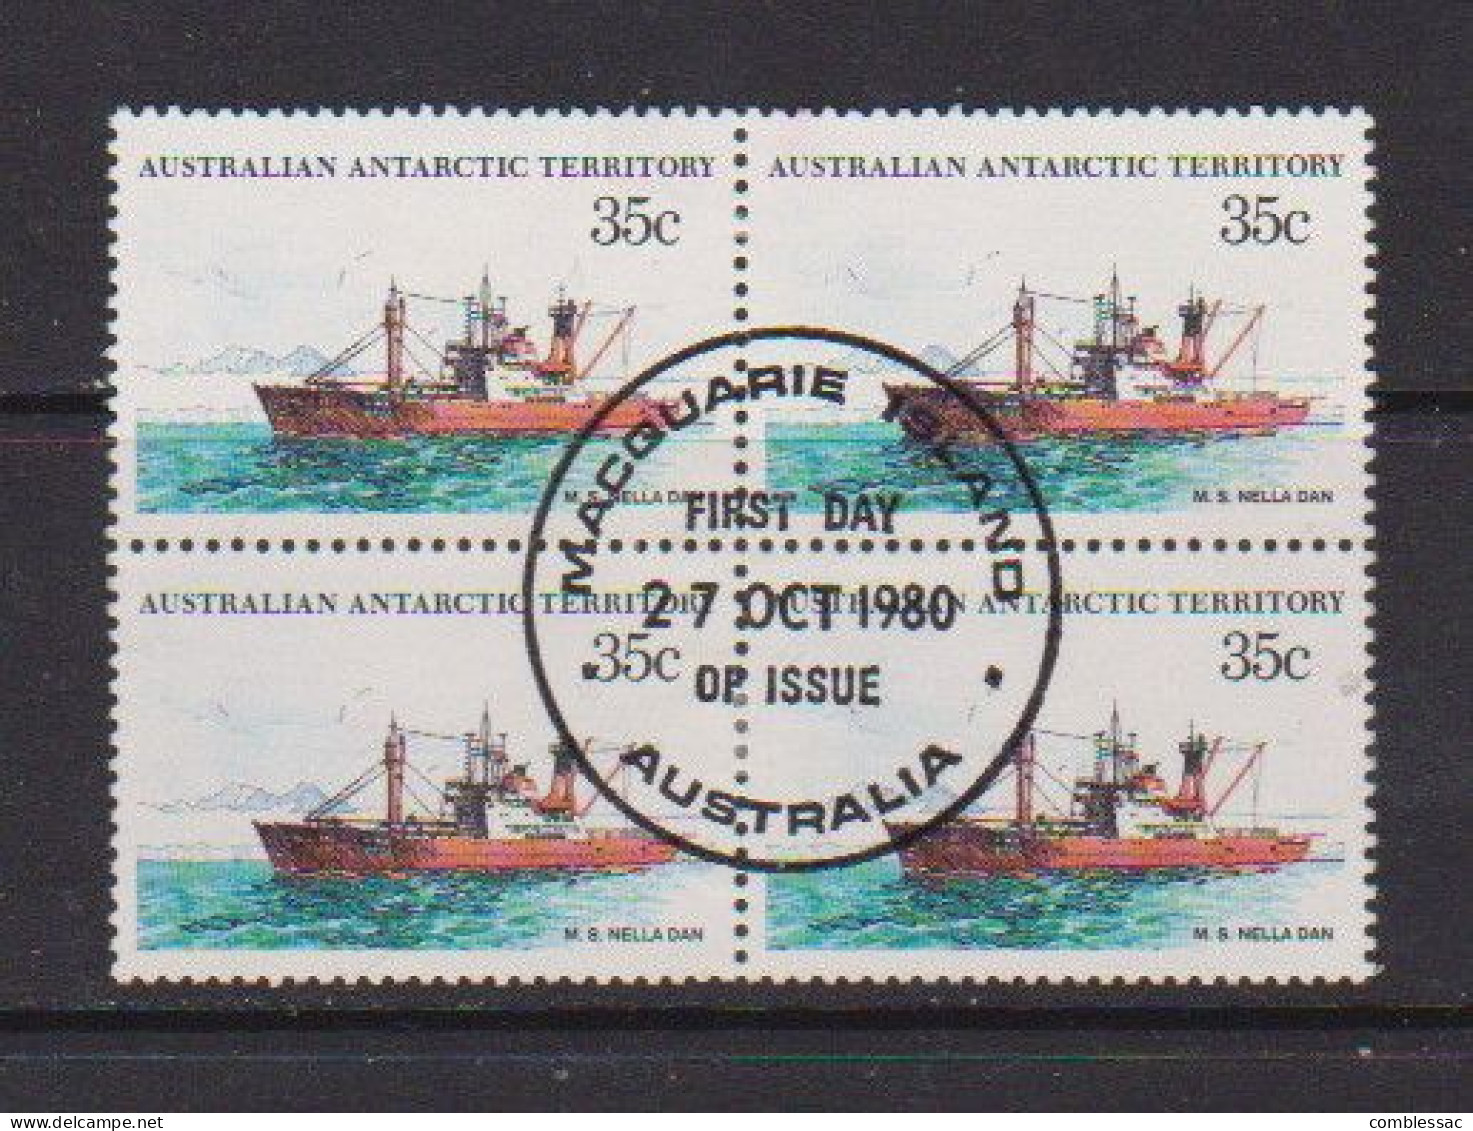 AUSTRALIAN  ANTARCTIC  TERRITORY    1980  Ships  35c  Block  Of  4  Post Marked  Firct  Day  Of  Issue  27th Oct  1980 - Used Stamps